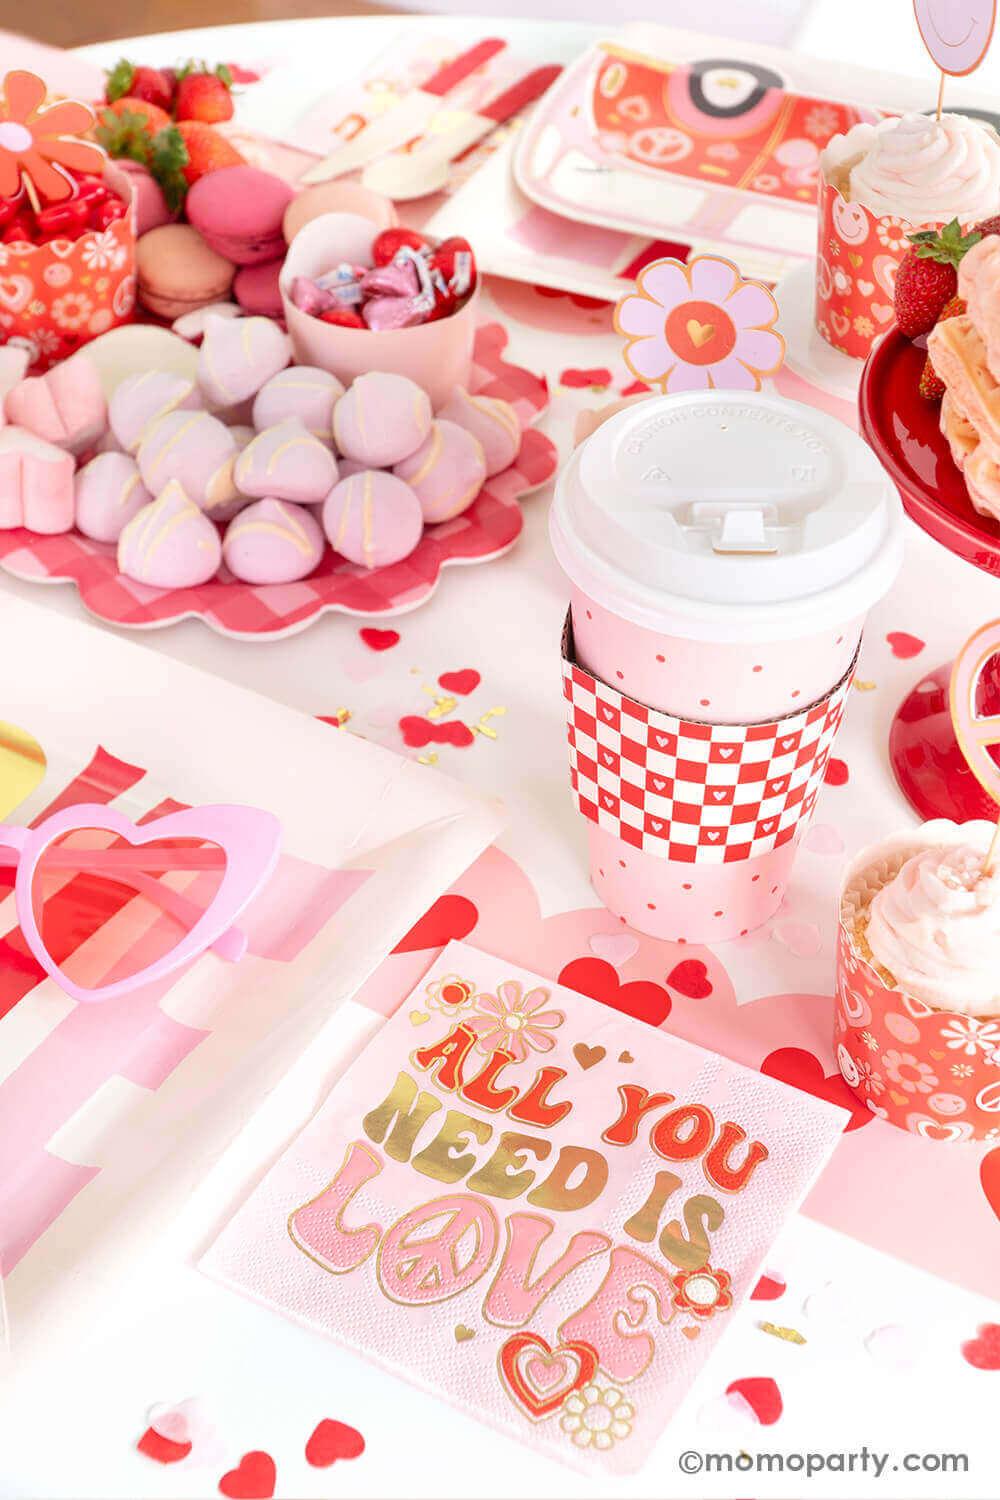 A party table featuring Momo Party's Groovy Valentine's party box with My Mind's Eye's retro Valentine's party supplies including baking cups, "all you need is love" napkins, VW bus shaped plates and red checkered party cups. On the table there's a heart shaped sweet board filled with Valentine's Day themed treats including macarons, strawberries, heart shaped marshmallows, heart shaped pink waffles and candies, a perfect inspo for a fun Valentine's celebration!